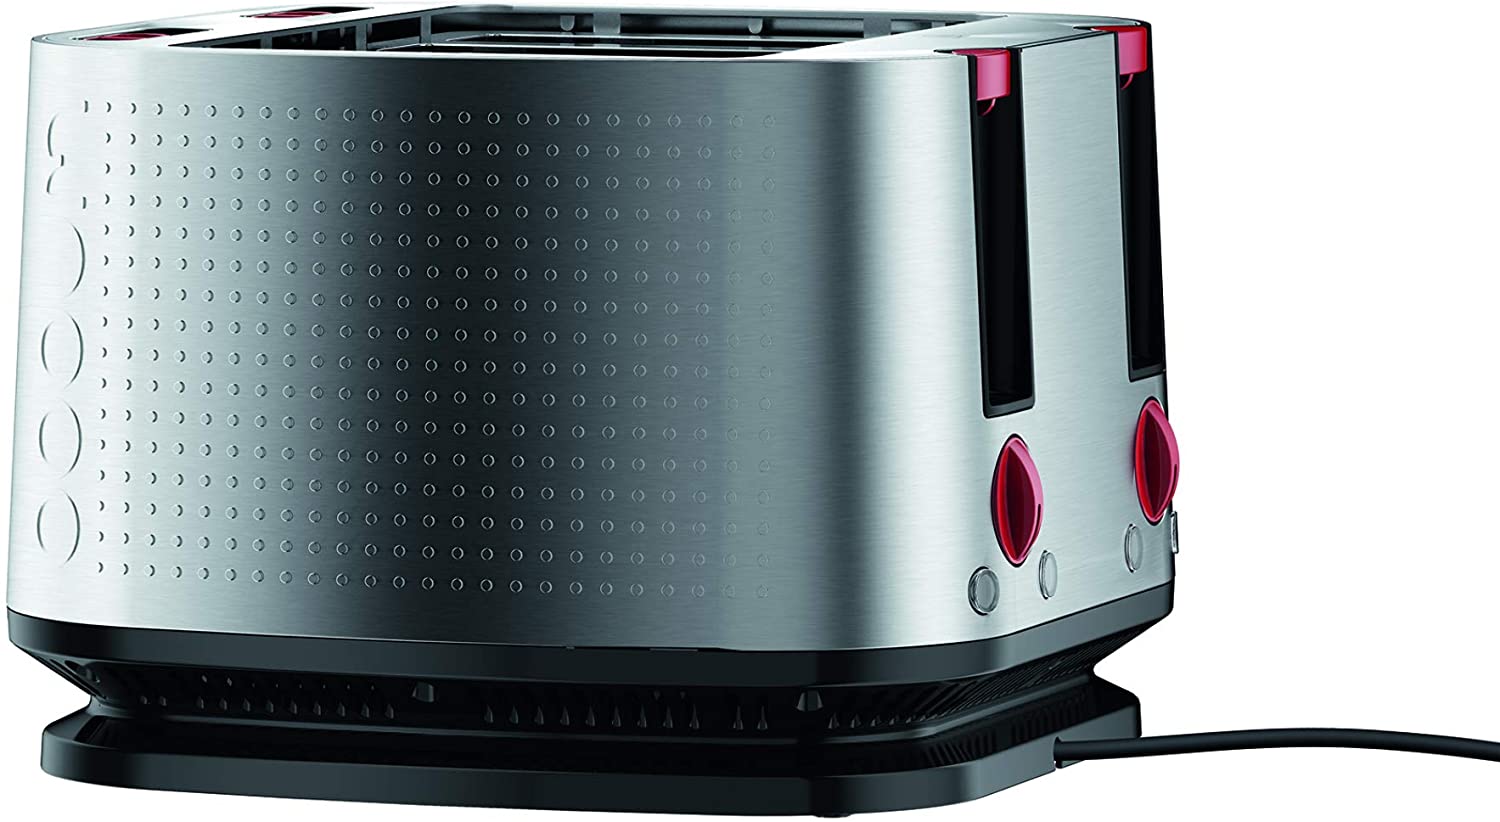 BODUM BISTRO Electric Toaster 4 Slots 1600 W Satin Stainless Steel